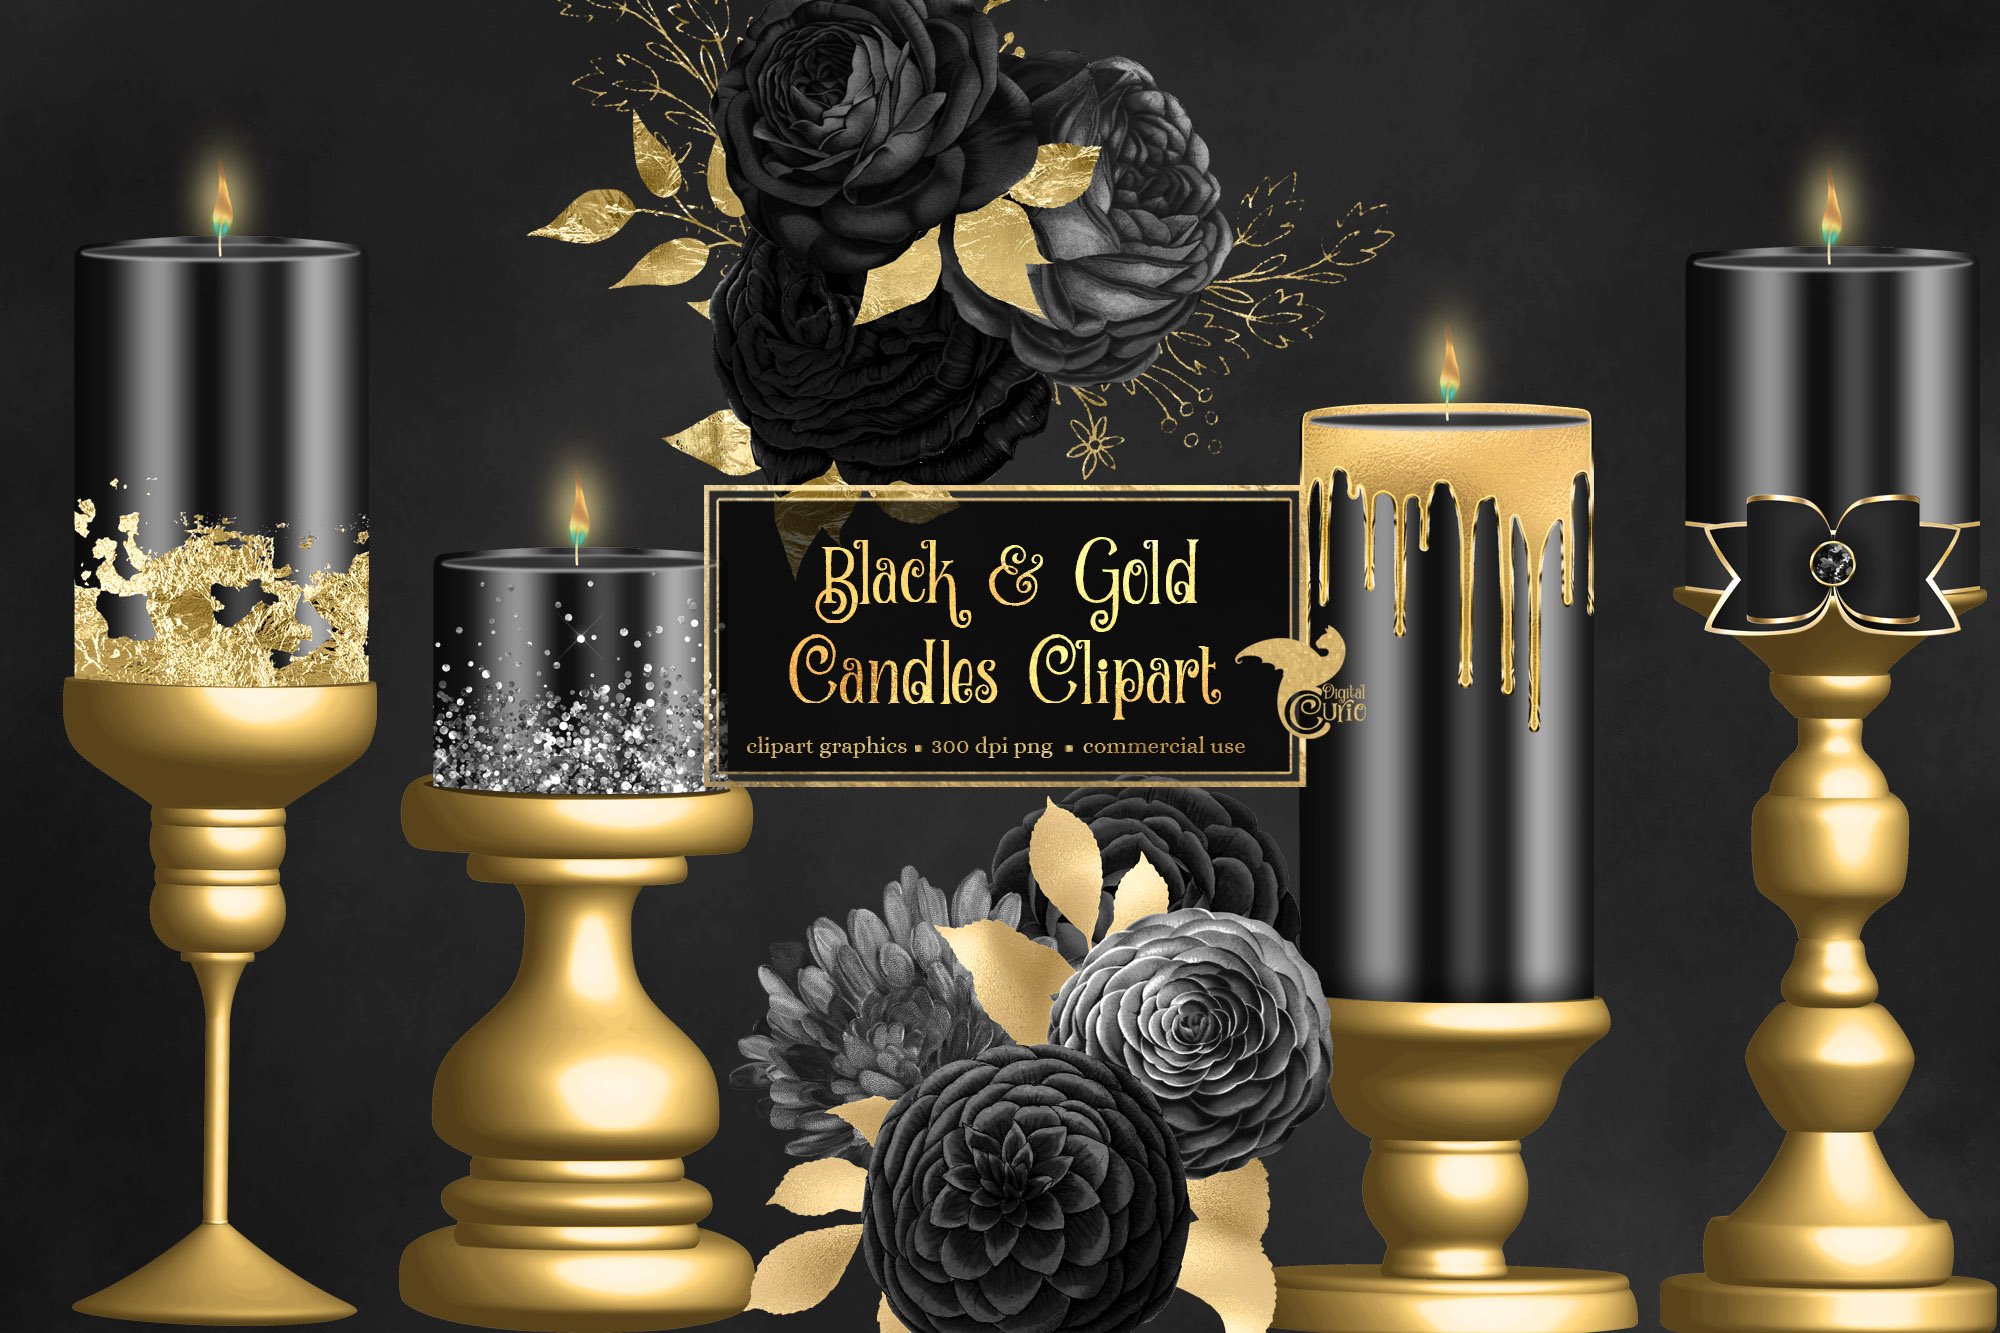 Black and Gold Candle Clipart cover image.